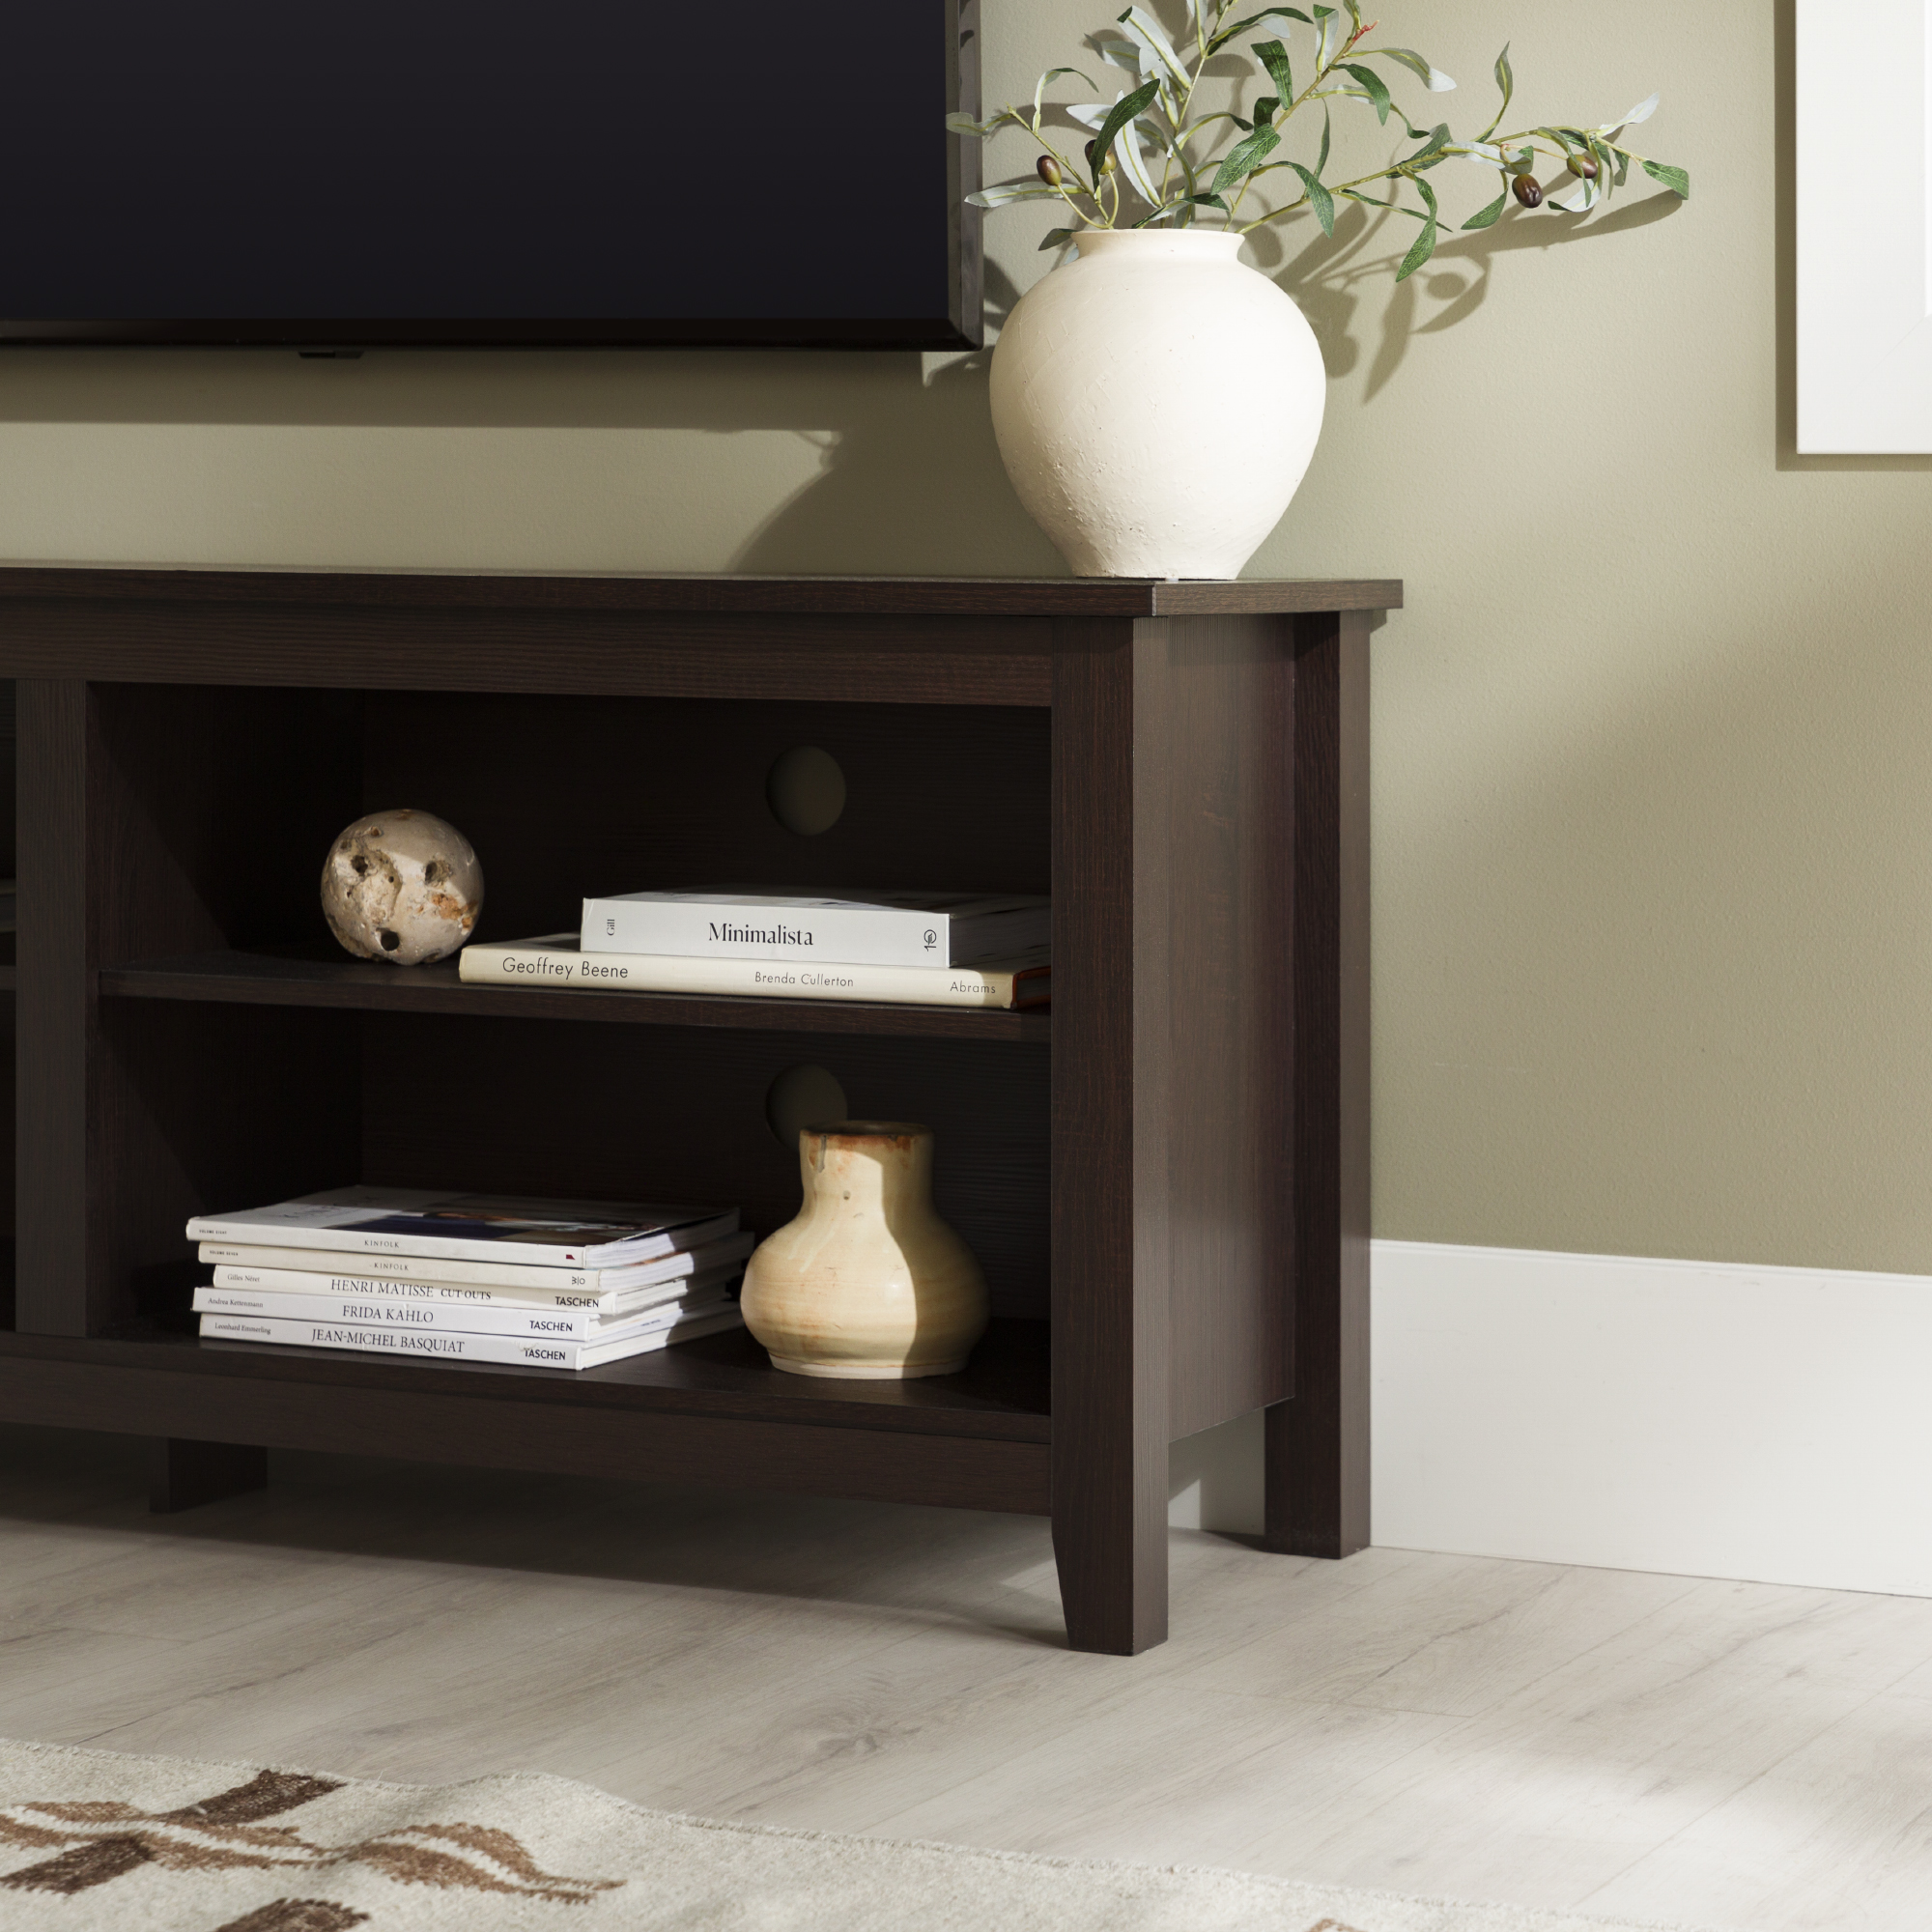 Walker Edison Contemporary Wood TV Media Storage Stand for TVs up to 60" - Espresso - image 4 of 7